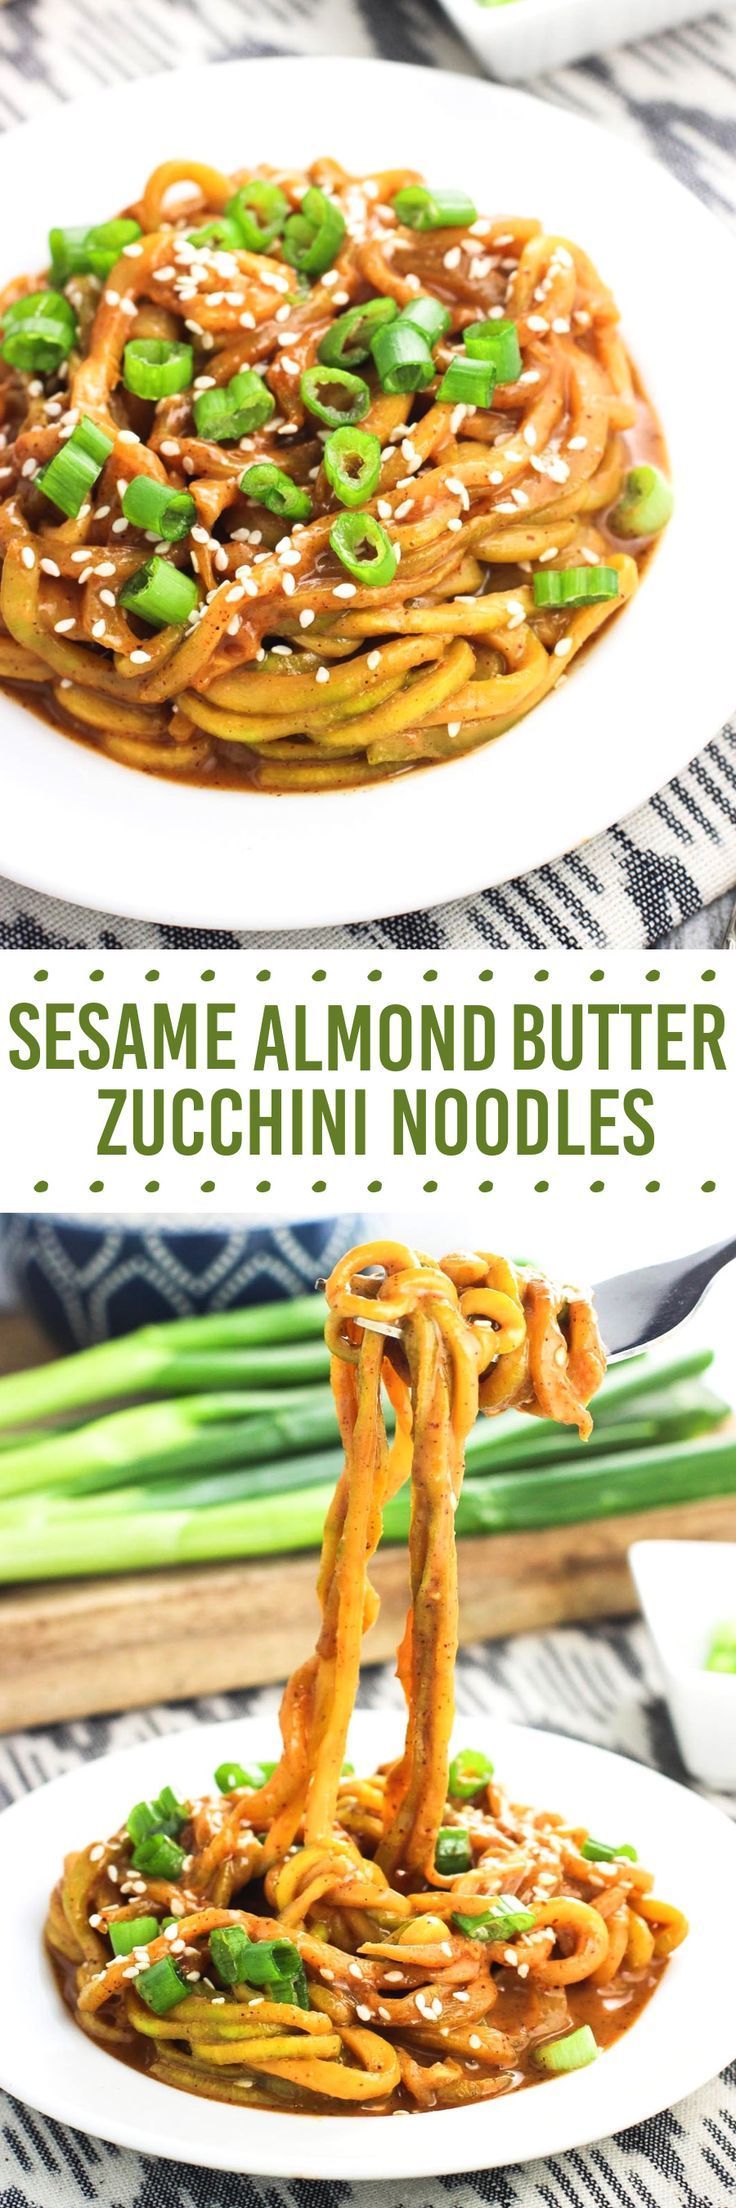 These sesame almond butter zucchini noodles make a healthy meal that takes about 20 minutes to make! The s